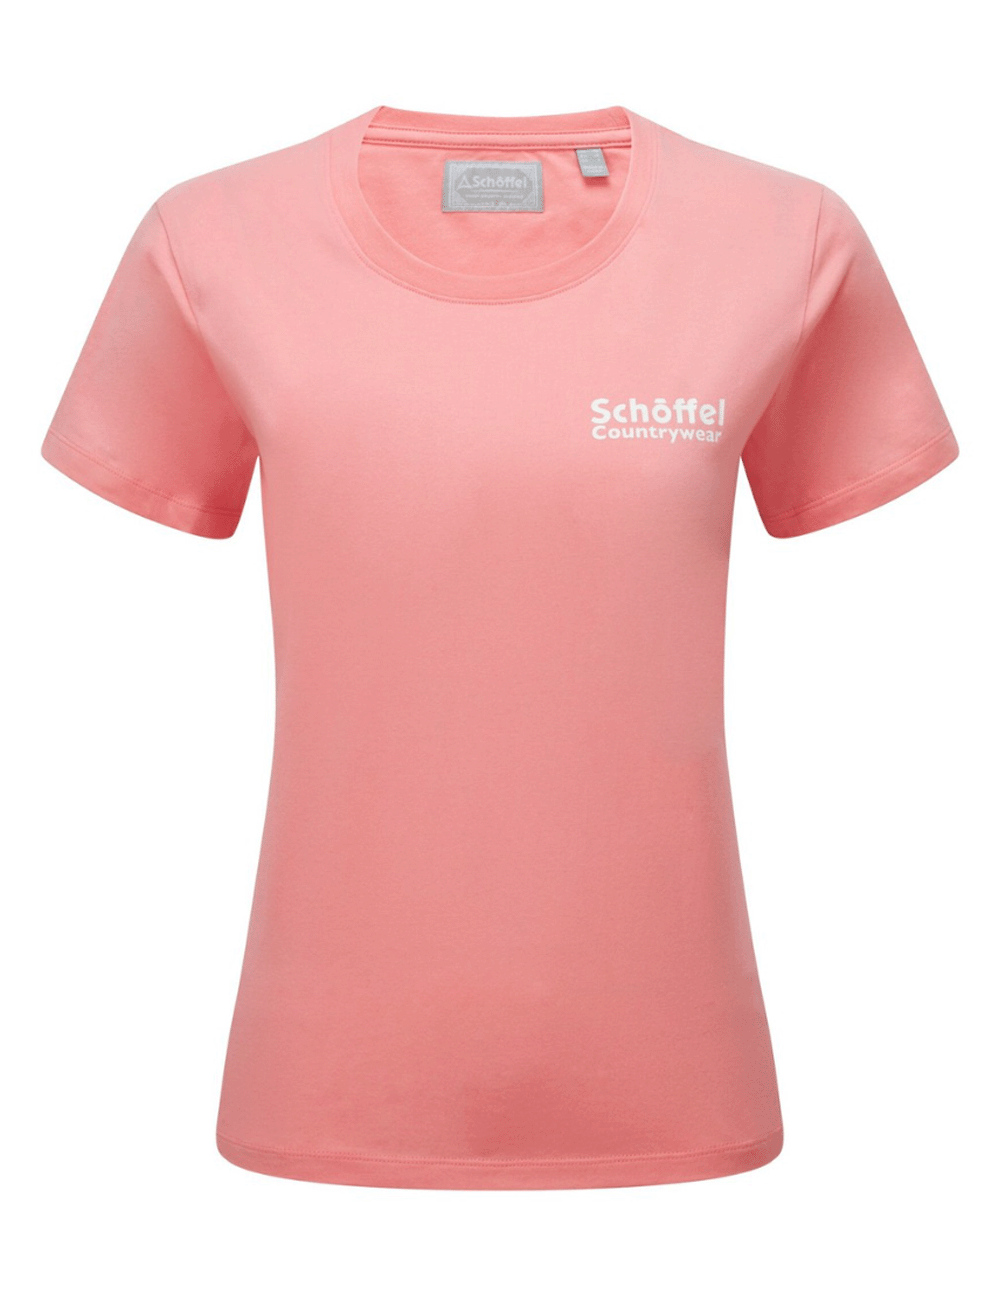 Schoffel's Torre T-Shirt in Flamingo on a white background